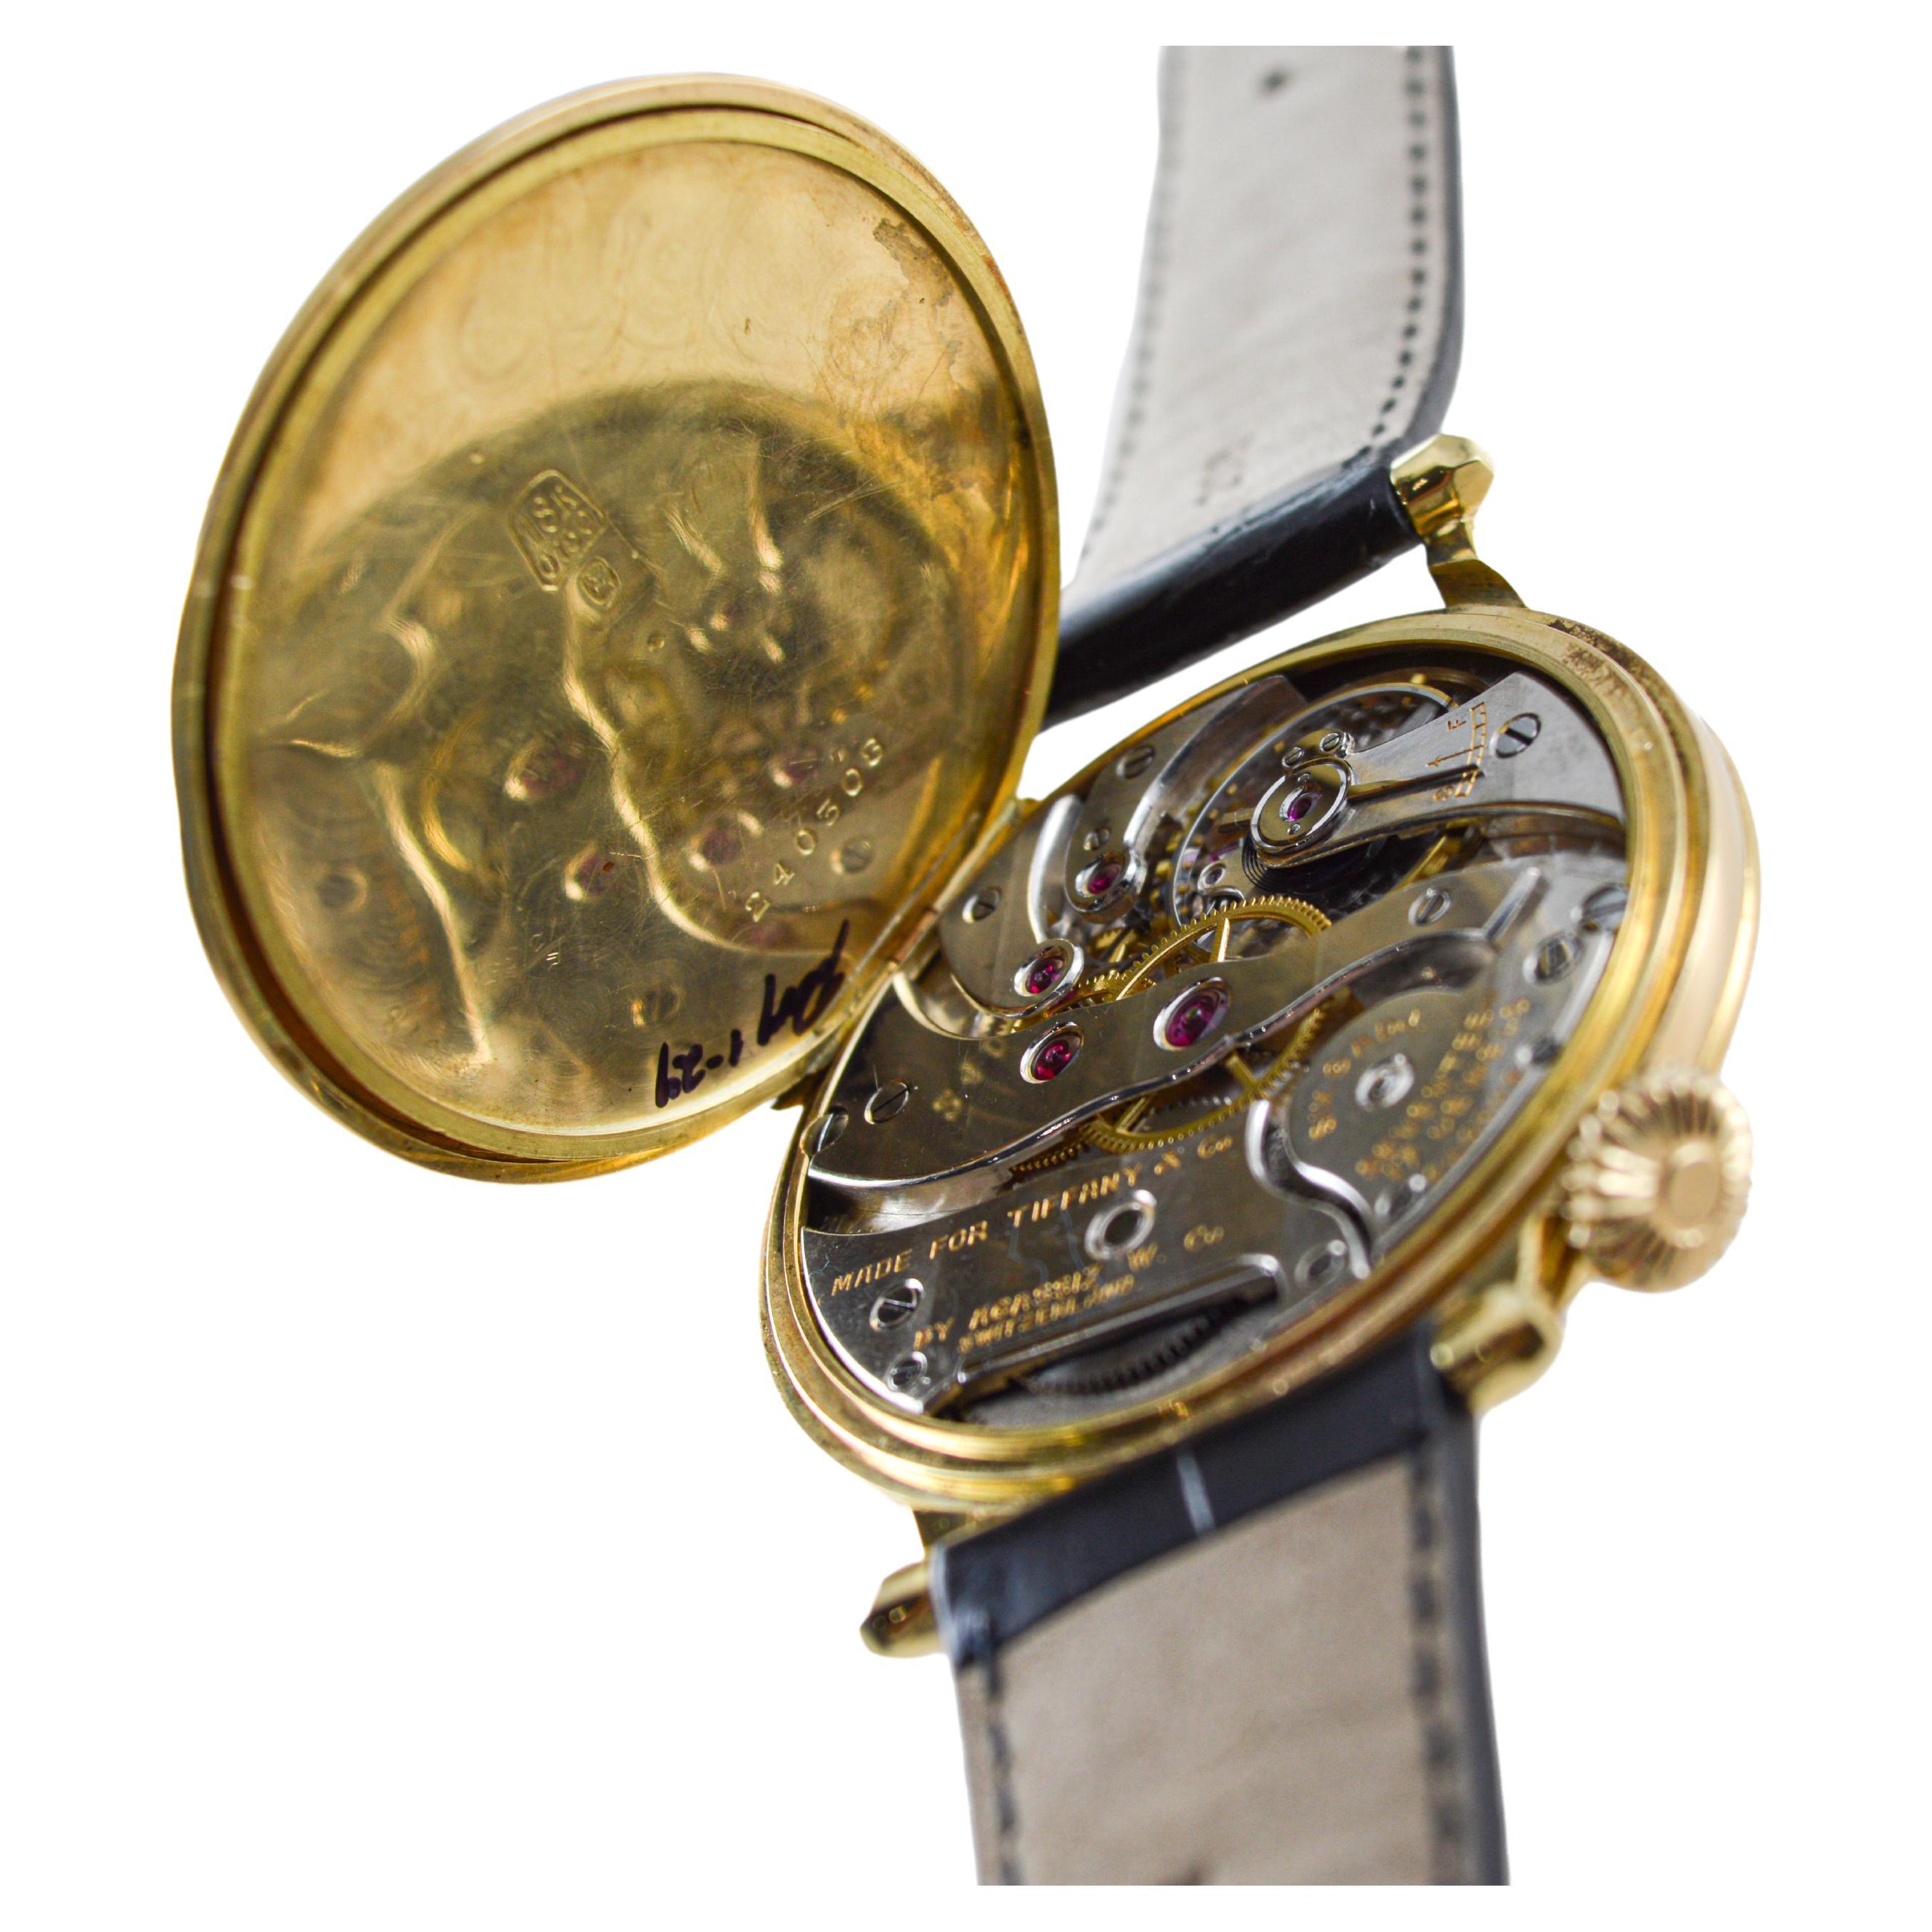 Agassiz 18Kt. Gold Oversized Watch for Tiffany & Co. Stern Freres Dial 1920's For Sale 9